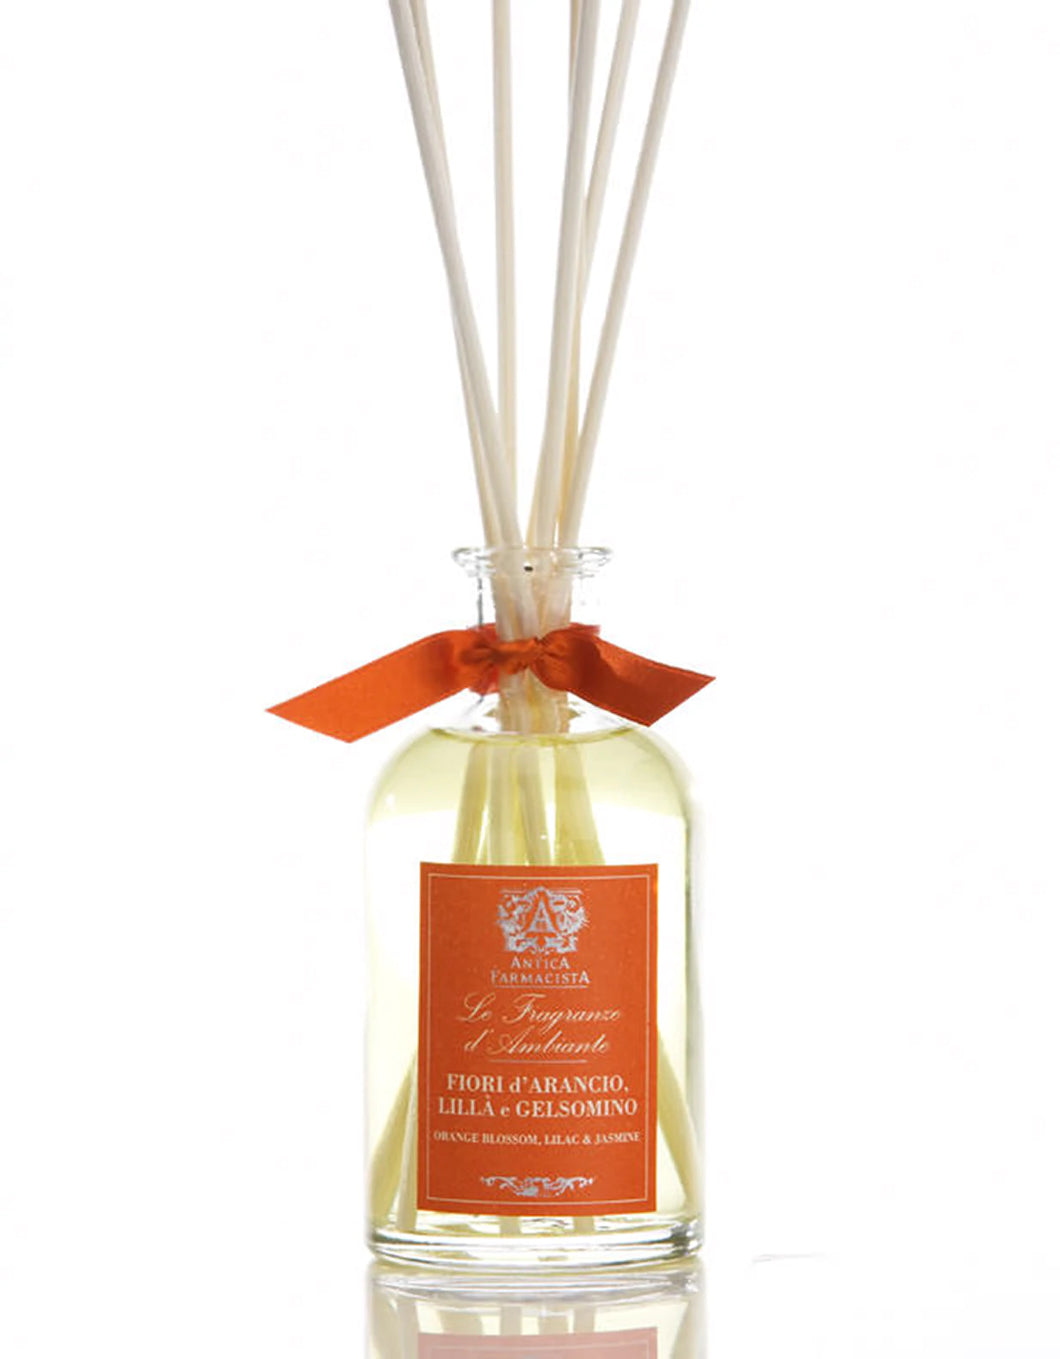 Domed glass container with white reeds orange Antica Farmacista label orange satin ribbon tied around neck of bottle.